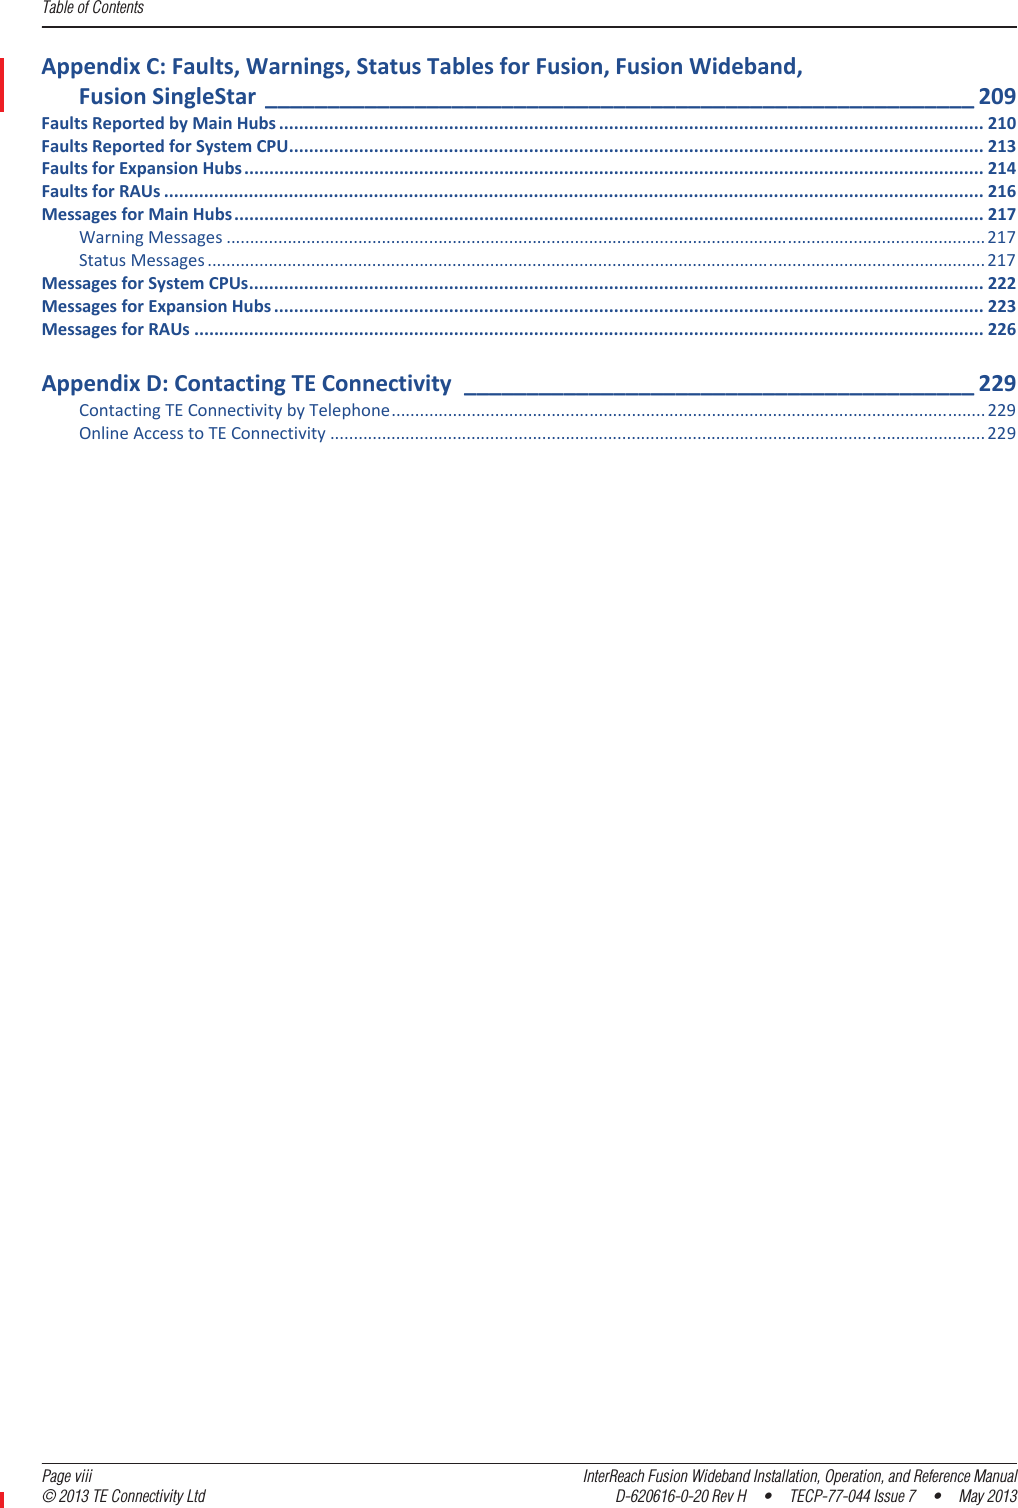 Table of Contents  Page viii InterReach Fusion Wideband Installation, Operation, and Reference Manual© 2013 TE Connectivity Ltd D-620616-0-20 Rev H  •  TECP-77-044 Issue 7  •  May 2013AppendixC:Faults,Warnings,StatusTablesforFusion,FusionWideband,FusionSingleStar _________________________________________________________ 209FaultsReportedbyMainHubs ............................................................................................................................................. 210FaultsReportedforSystemCPU........................................................................................................................................... 213FaultsforExpansionHubs.................................................................................................................................................... 214FaultsforRAUs .................................................................................................................................................................... 216MessagesforMainHubs...................................................................................................................................................... 217WarningMessages .................................................................................................................................................................217StatusMessages .....................................................................................................................................................................217MessagesforSystemCPUs................................................................................................................................................... 222MessagesforExpansionHubs .............................................................................................................................................. 223MessagesforRAUs .............................................................................................................................................................. 226AppendixD:ContactingTEConnectivity _________________________________________ 229ContactingTEConnectivitybyTelephone.............................................................................................................................. 229OnlineAccesstoTEConnectivity ...........................................................................................................................................229